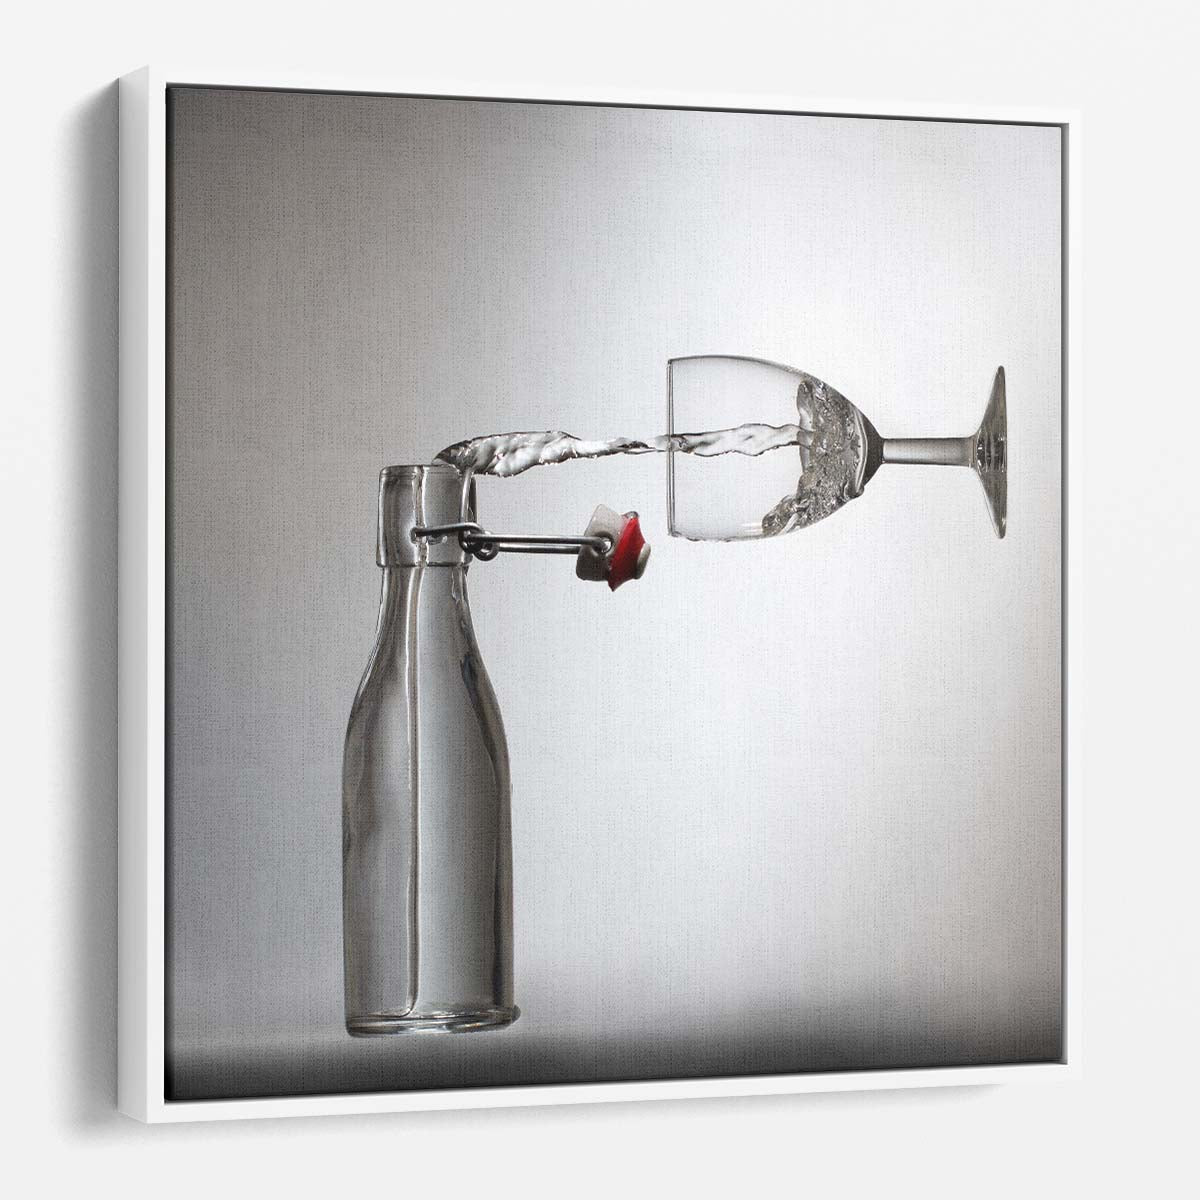 Illusionary Liquid Pour Concept Still Life Photography Wall Art by Luxuriance Designs. Made in USA.